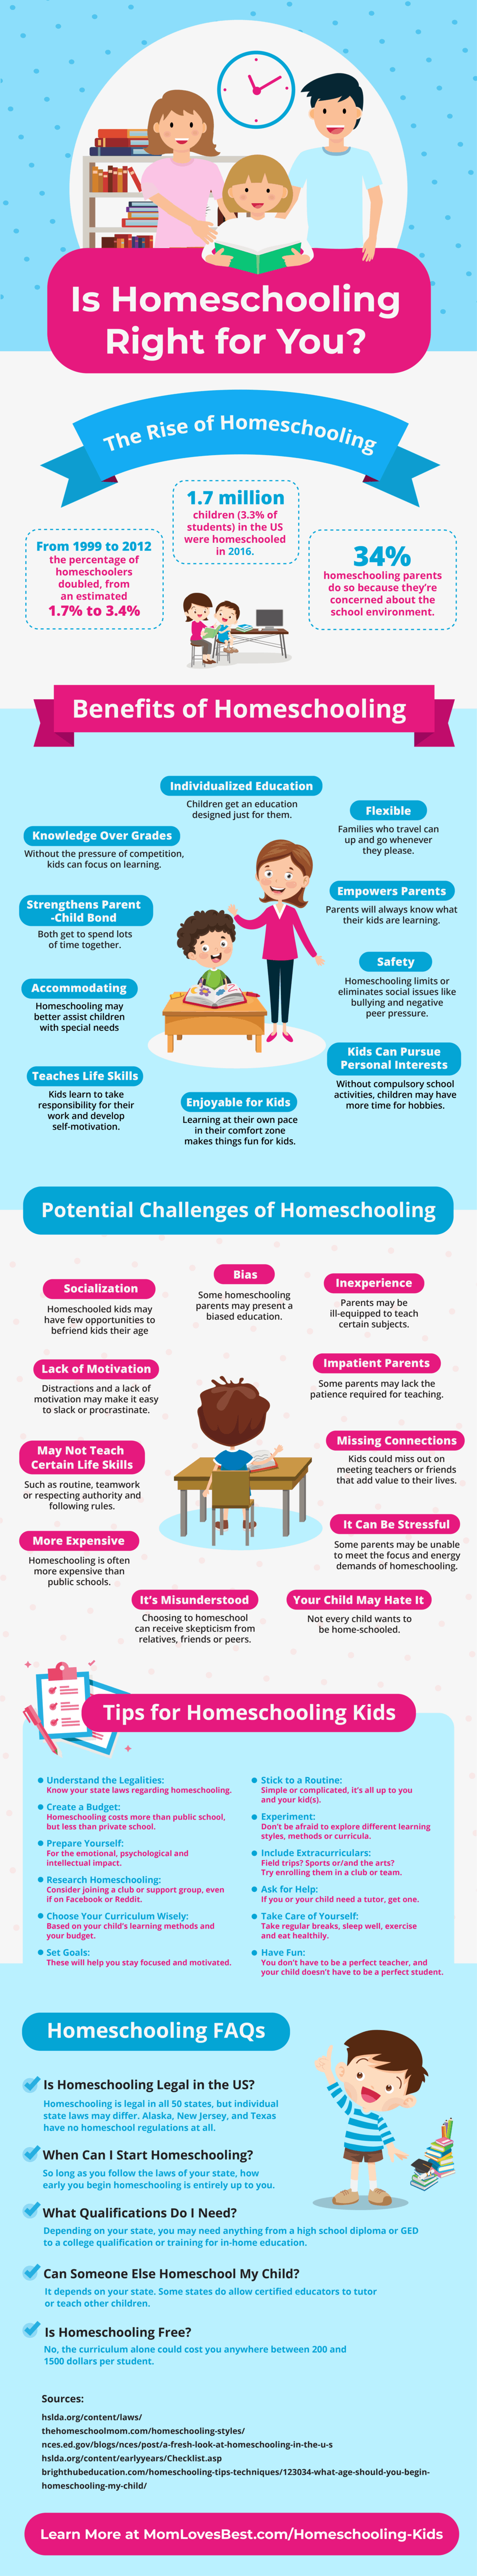 Homeschooling benefits and disadvantages